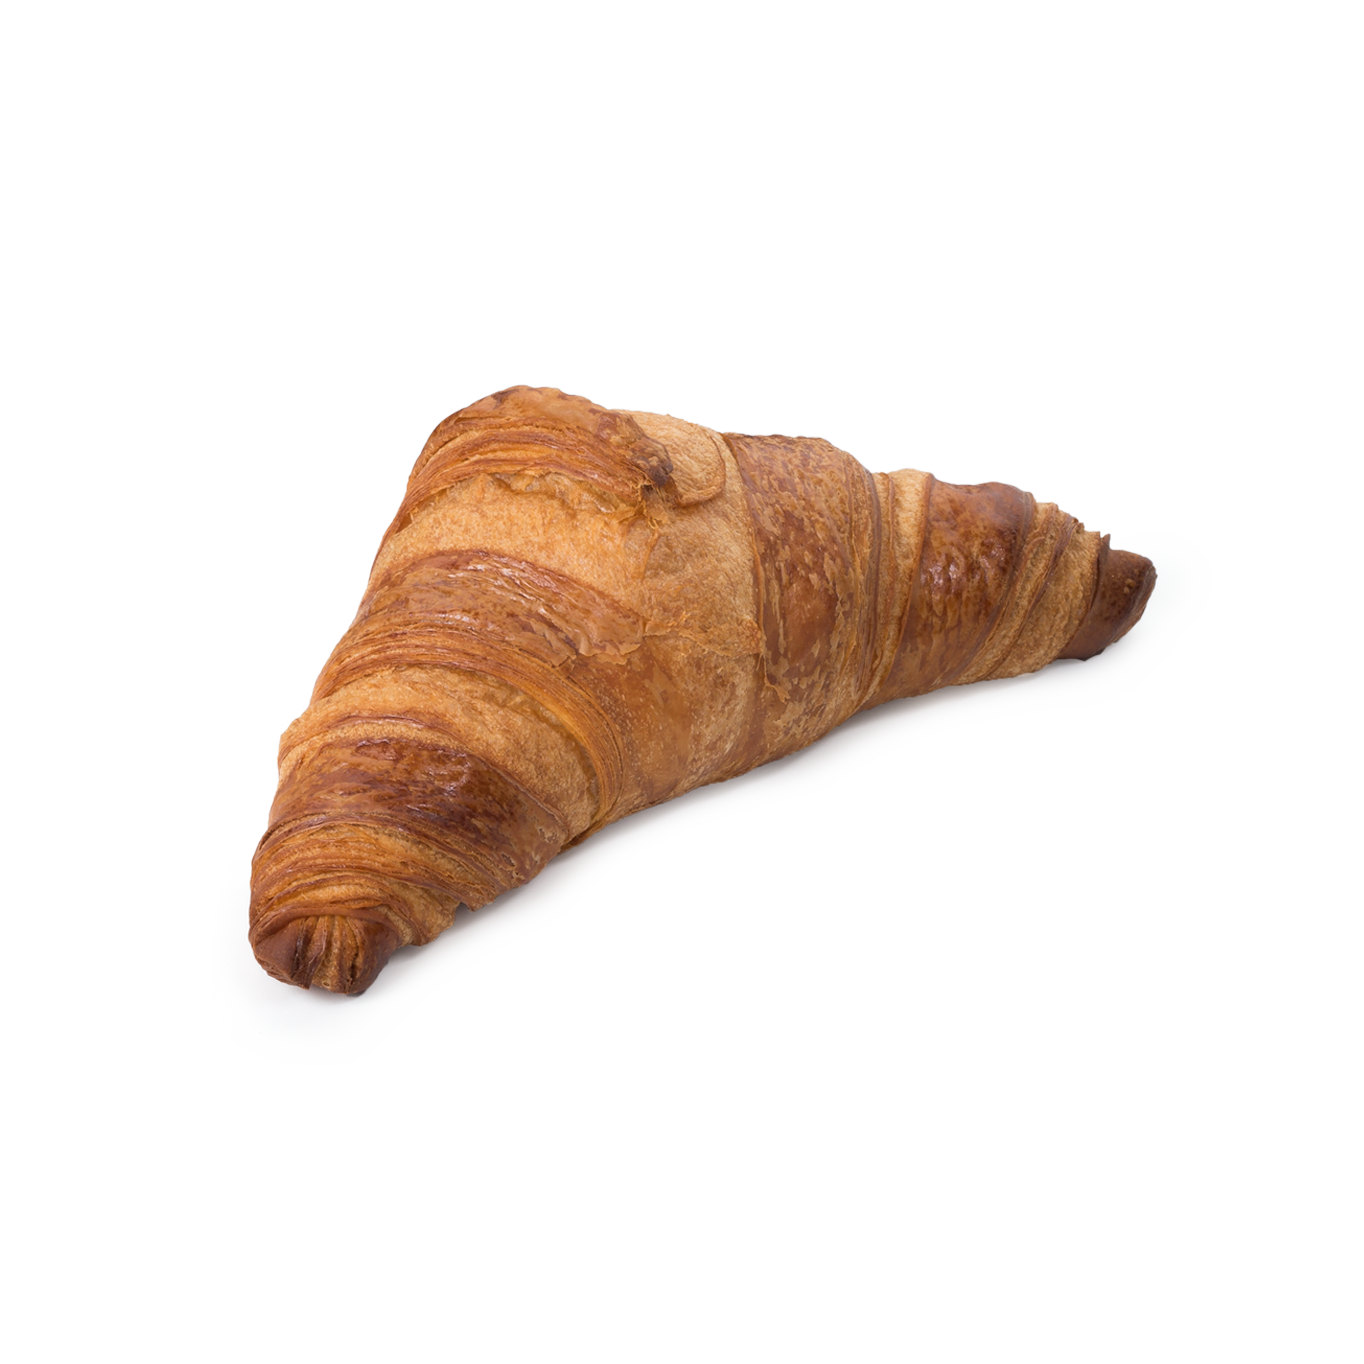 Ferm. Straight Butter Croissant 70g - Pre-baked bread and frozen pastries | Billiger Montag